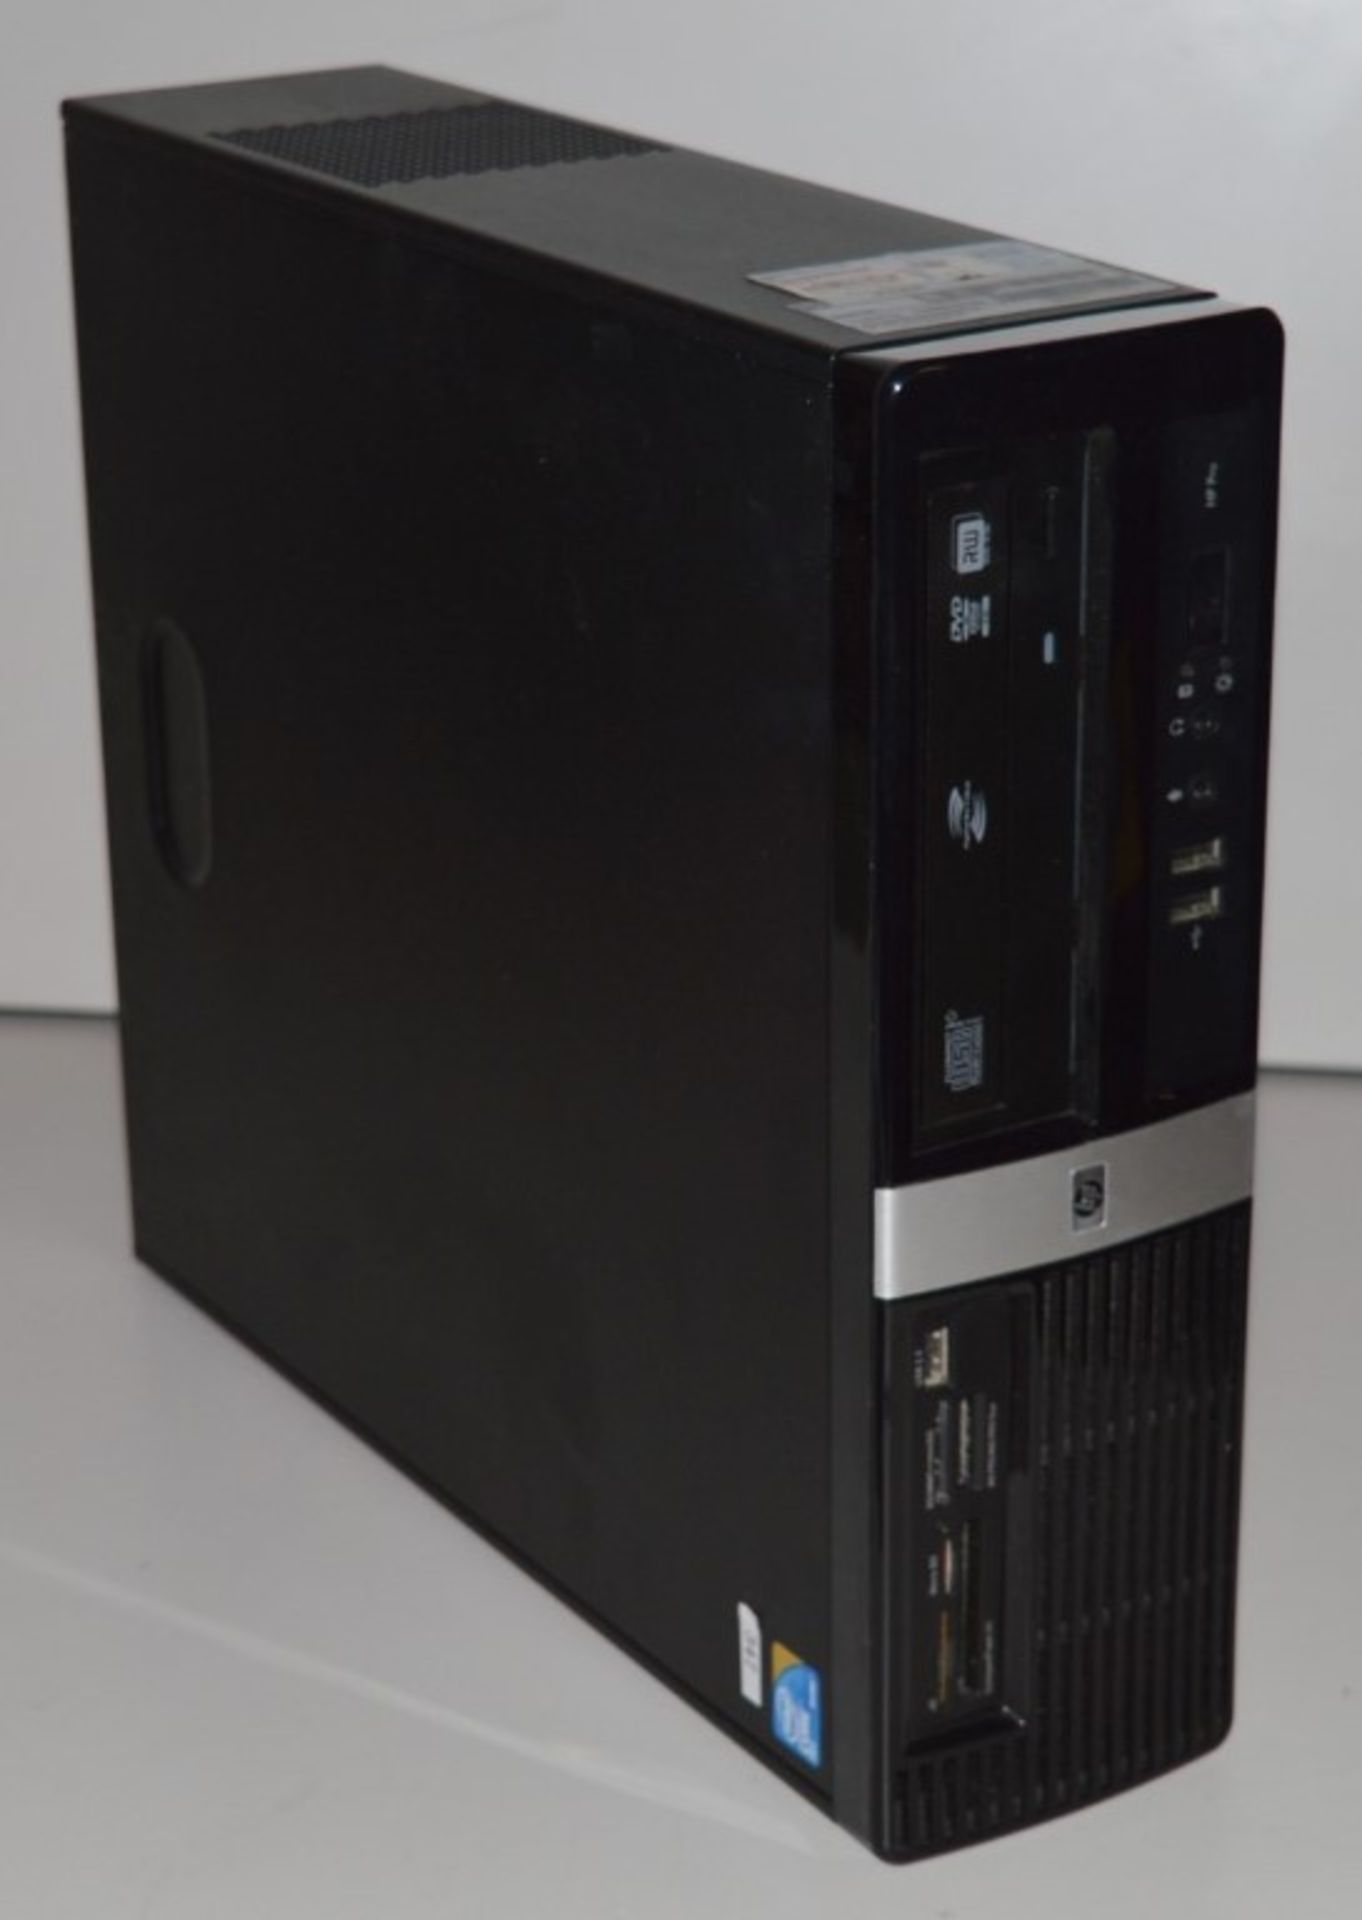 1 x HP Pro 3010 Small Form Factor PC - Features Intel Core 2 Duo 2.9ghz Processor, 4gb DDR3 Ram, - Image 3 of 3